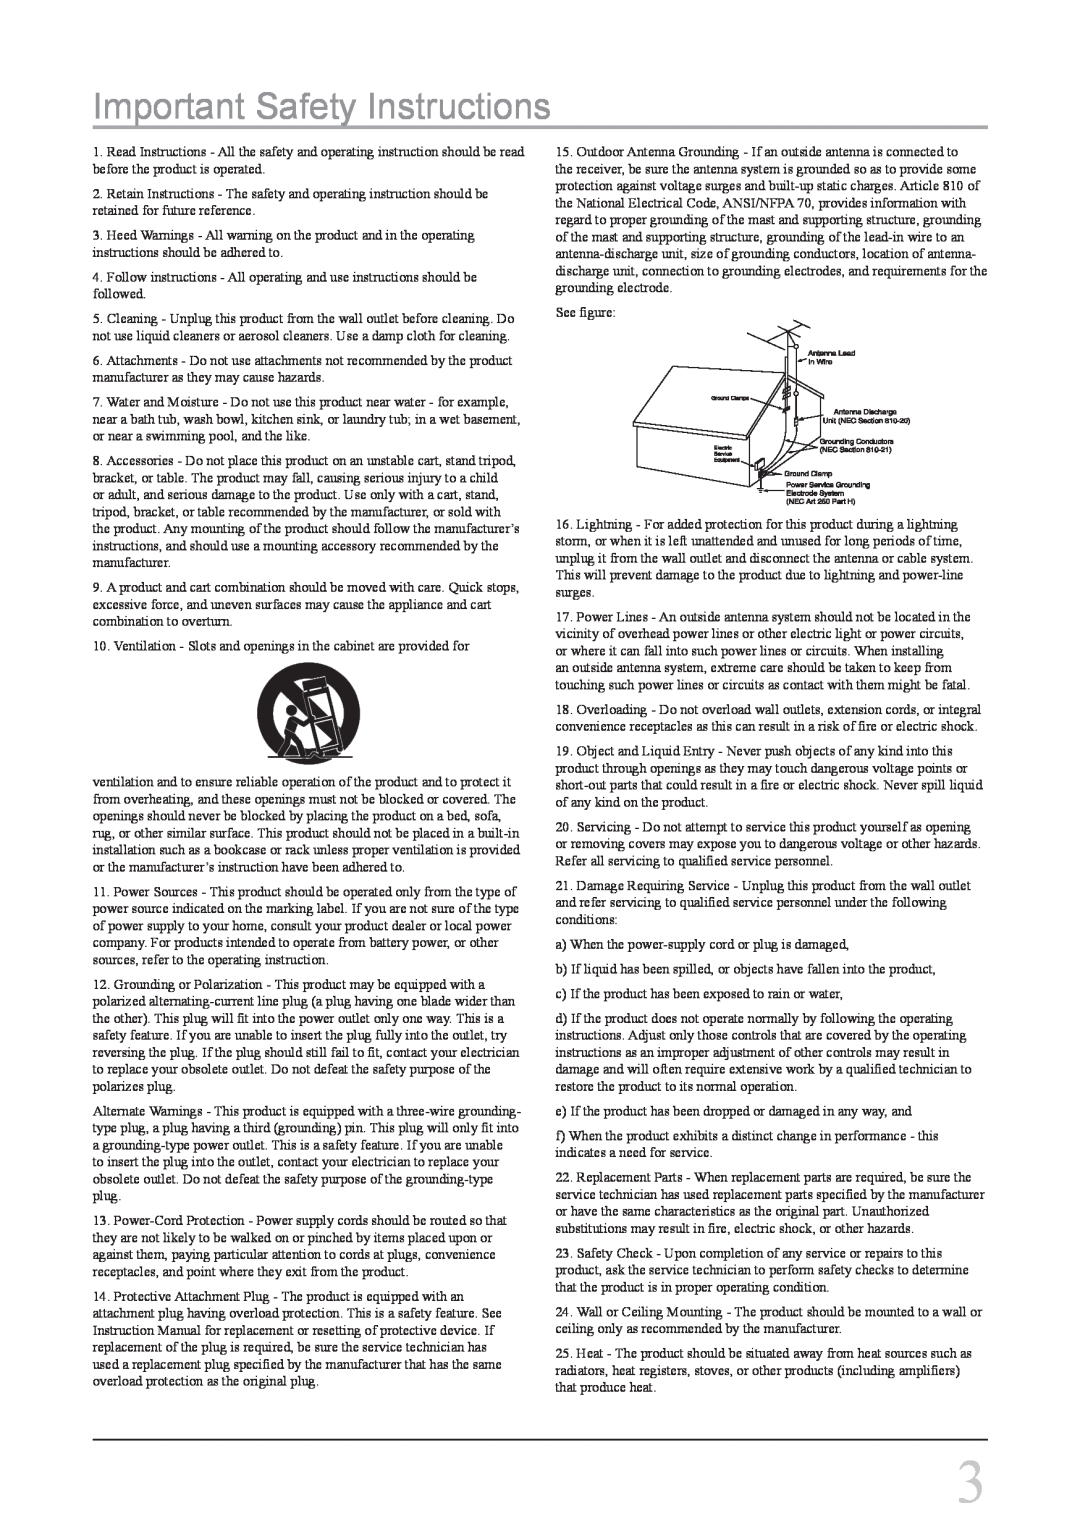 GPX PD708B important safety instructions Important Safety Instructions 